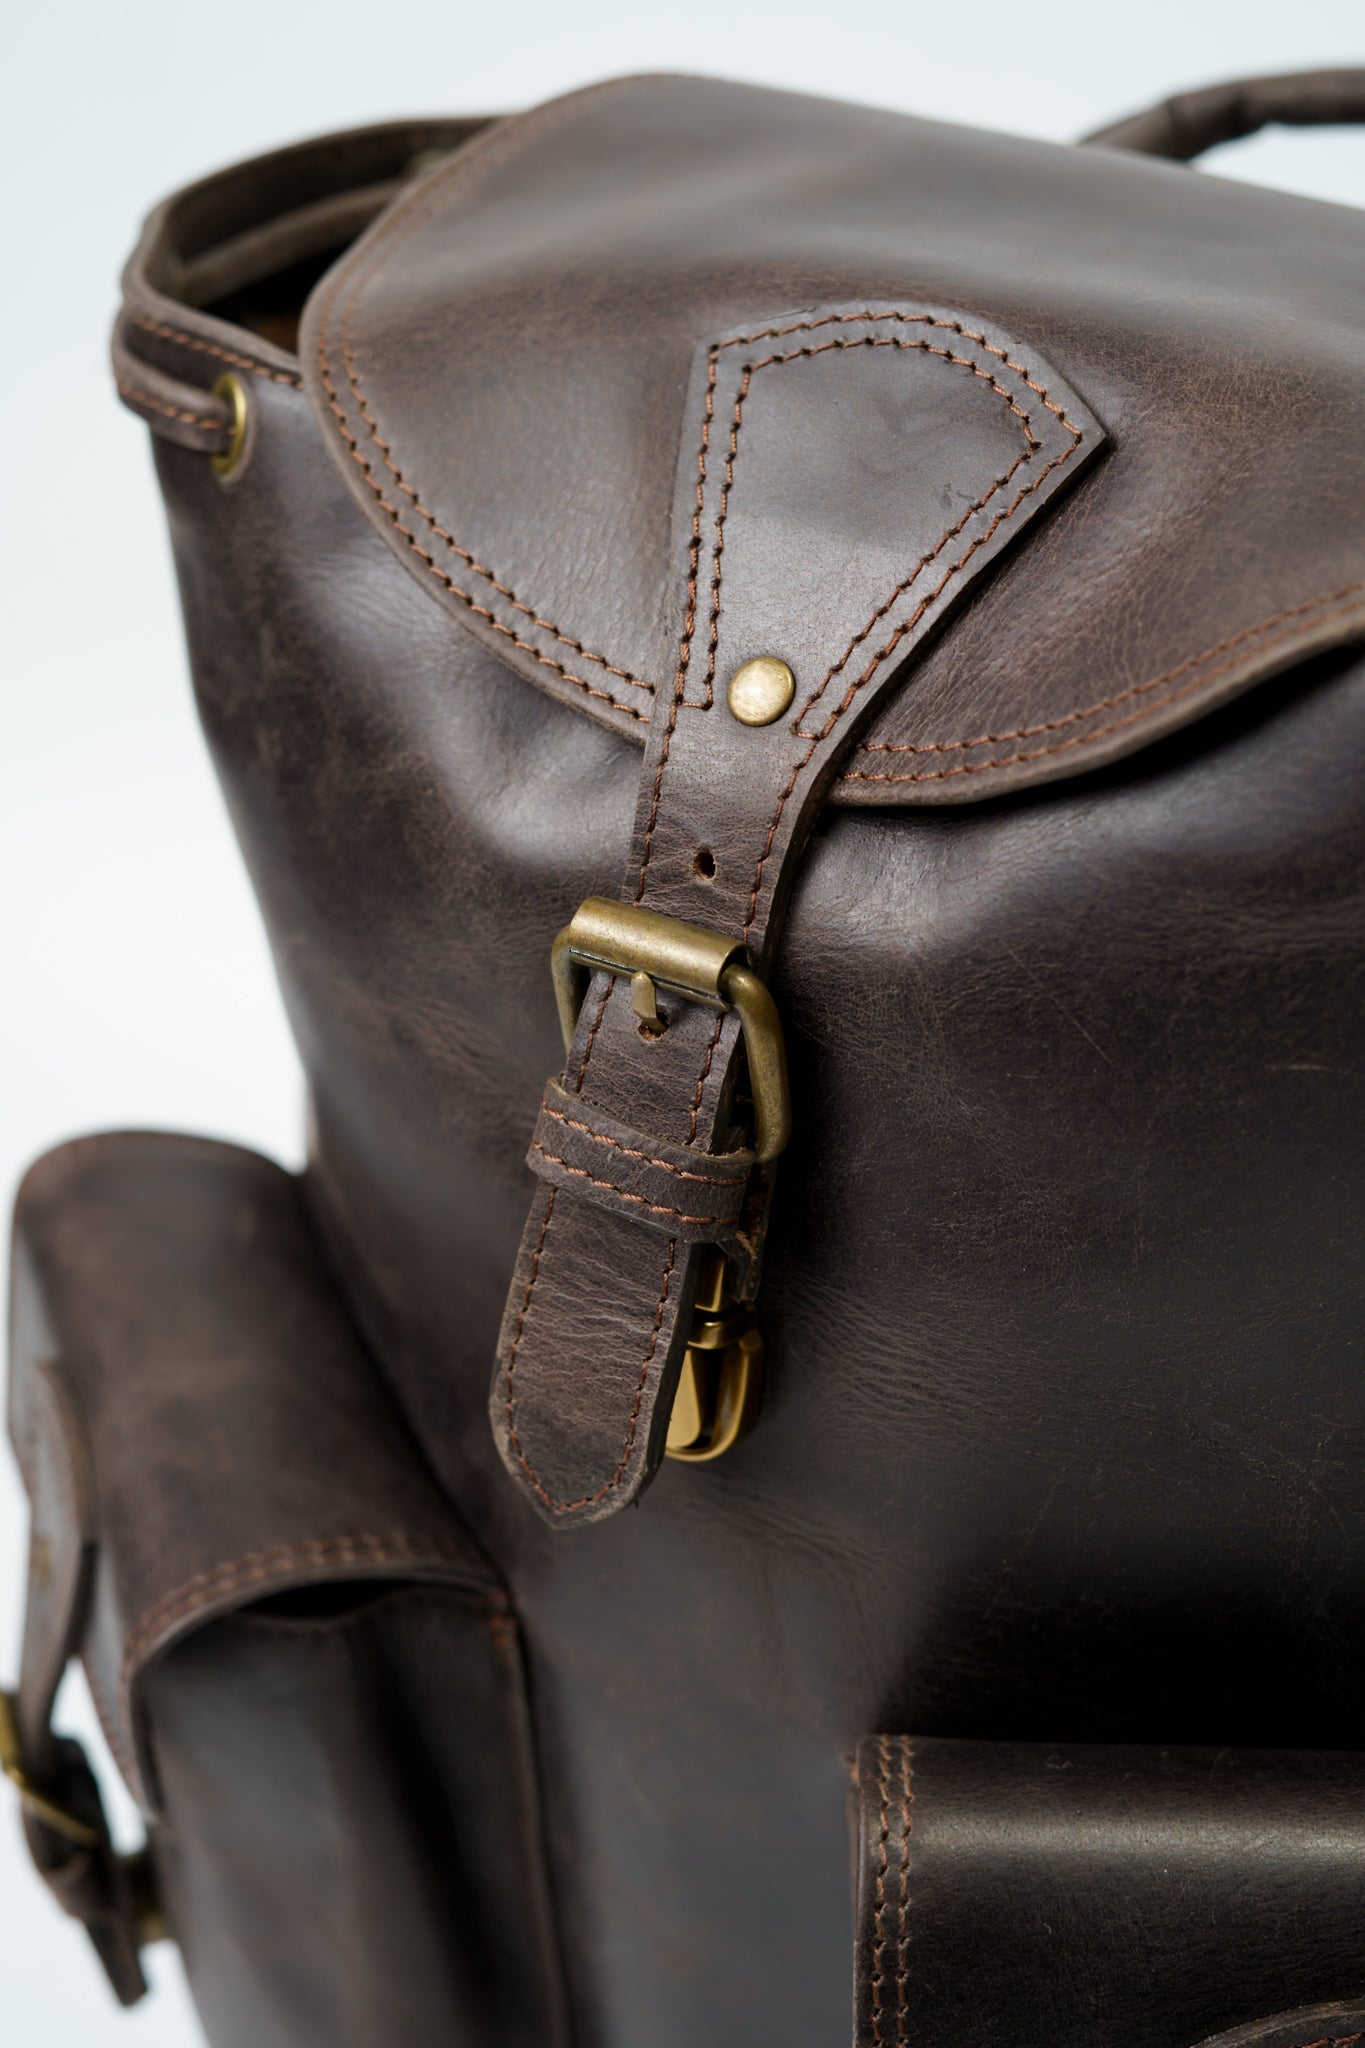 Close-up of the strap and buckle on the front pocket closure on Chamra's Brown Utility Leather Backpack. The image showcases high quality stitching, as well as the finish on the metal buckles.